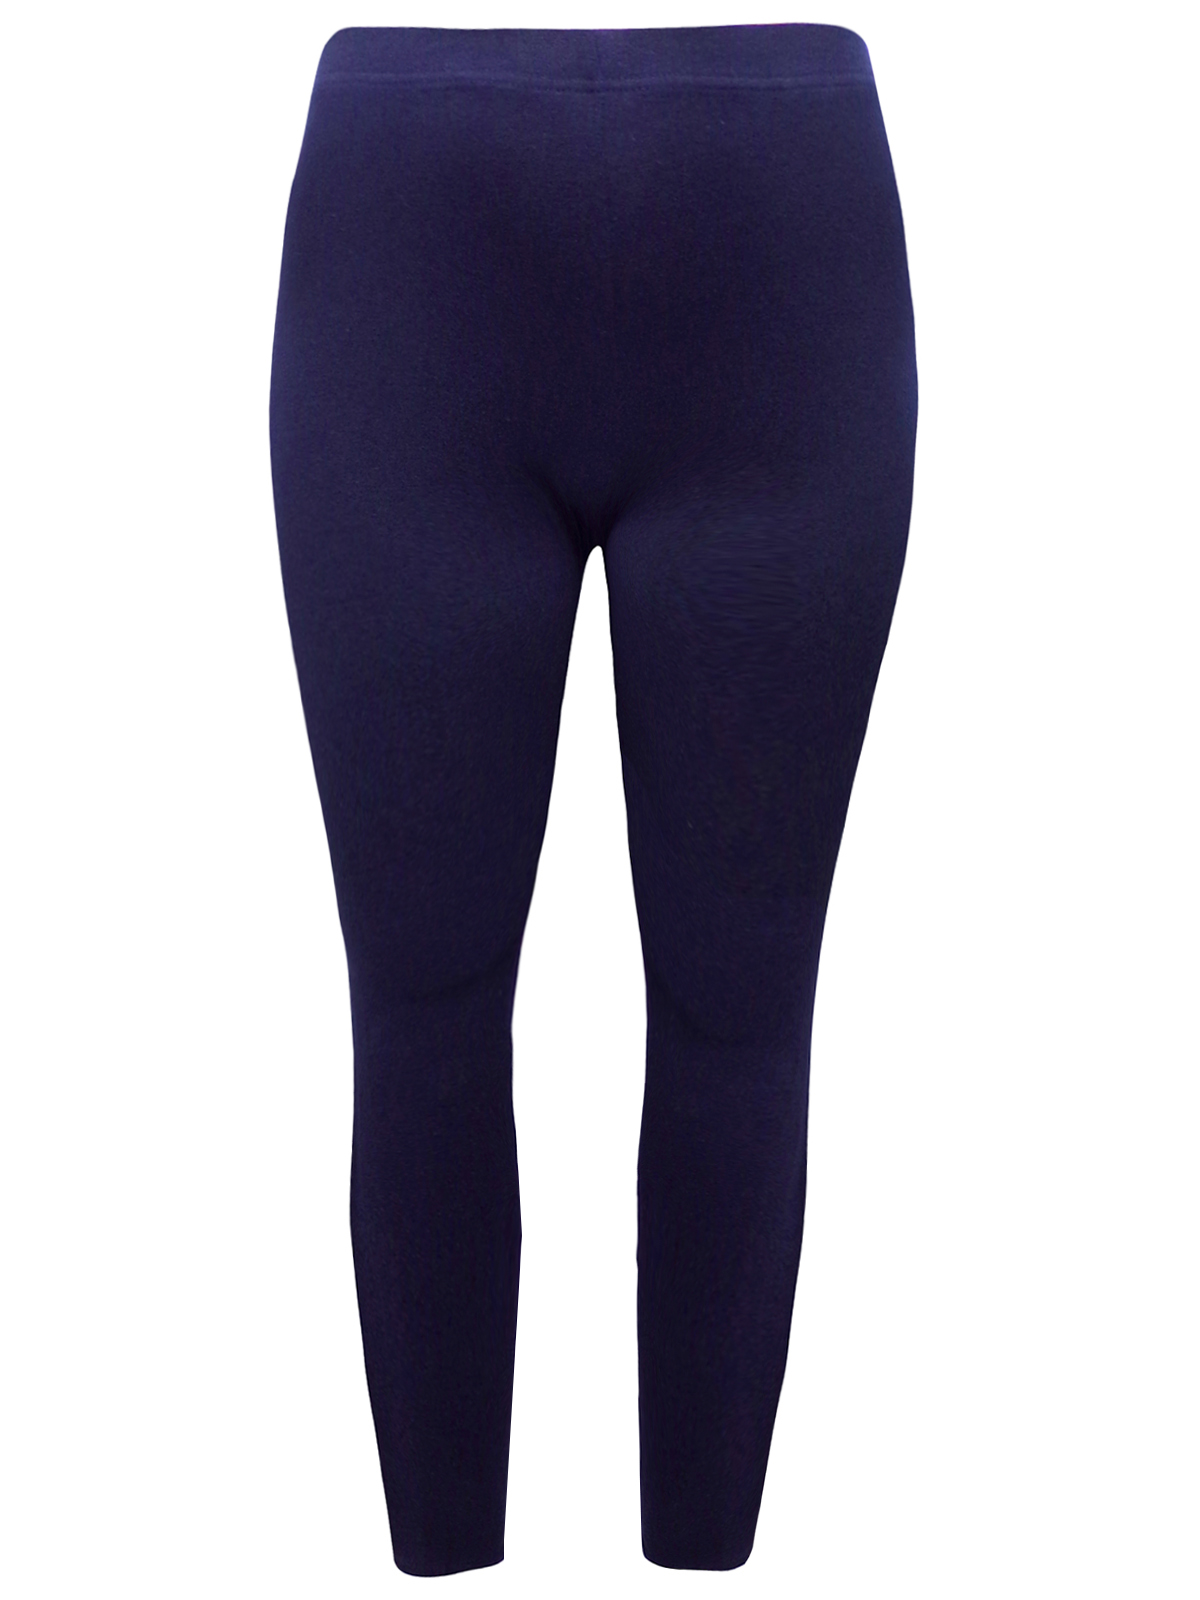 Red Tag - - RedTag NAVY Cotton Rich Opaque Full Length Leggings - Plus ...